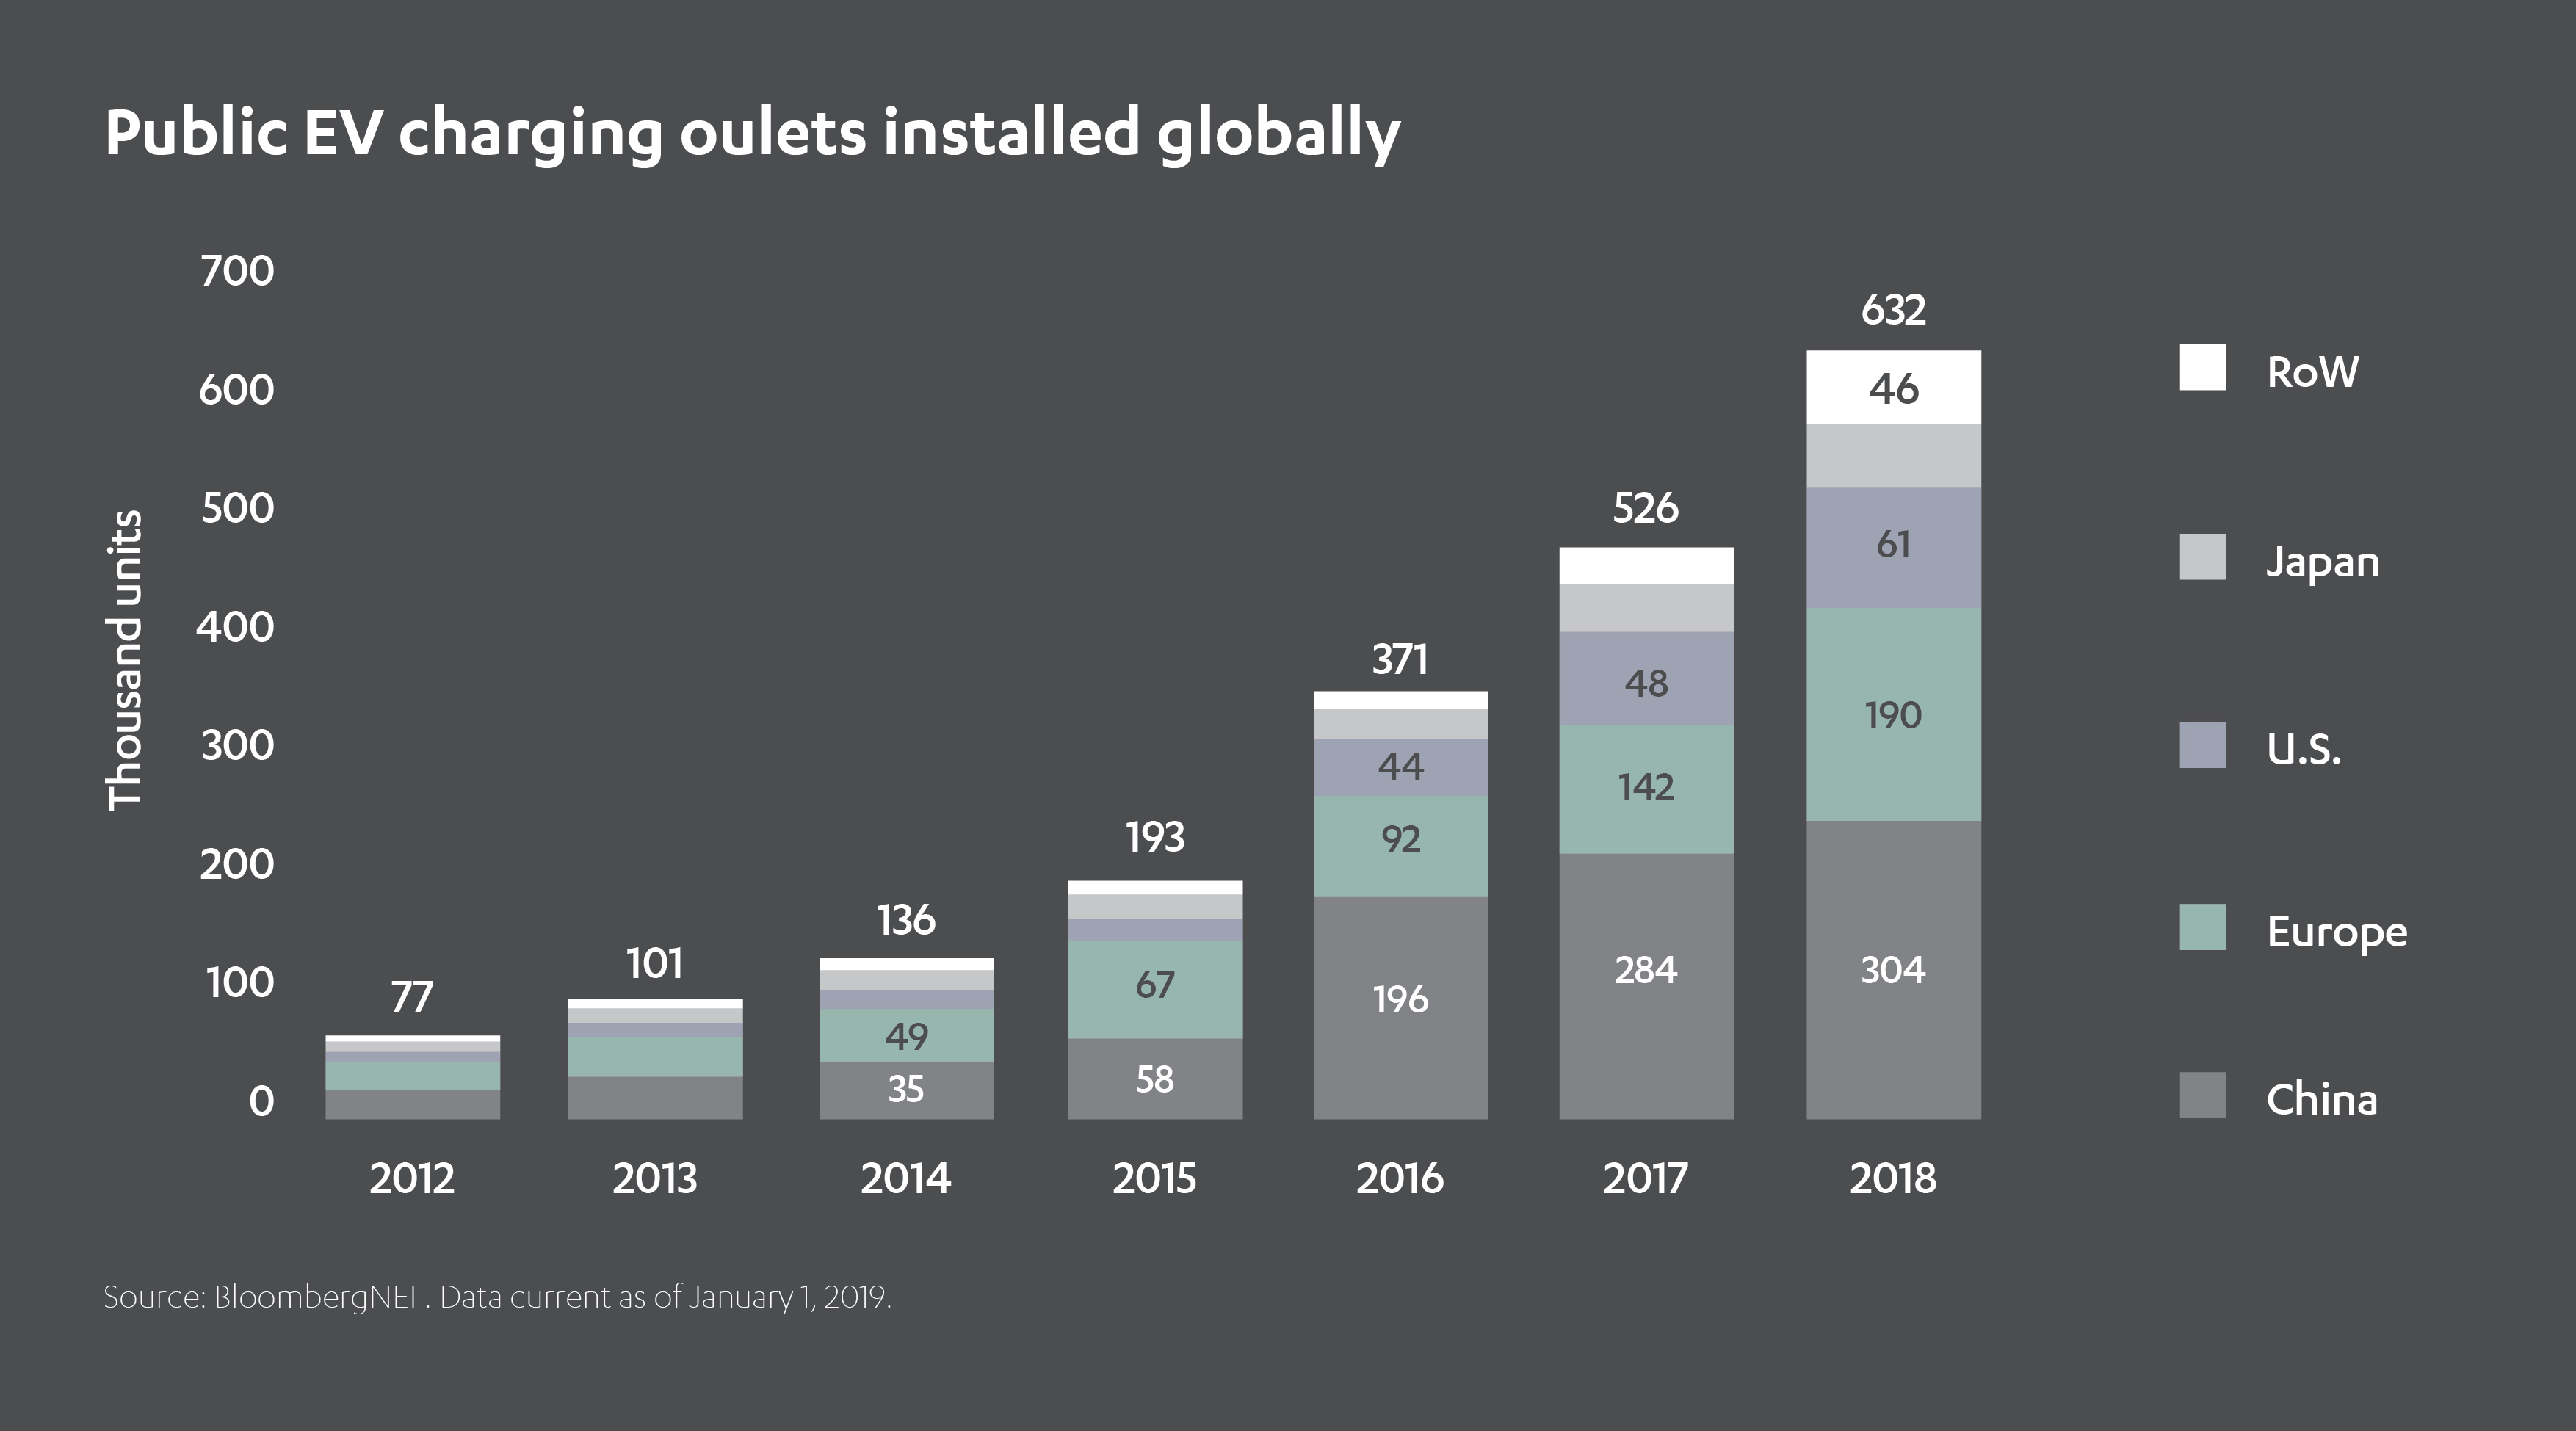 Public EV charging outlets installed globally